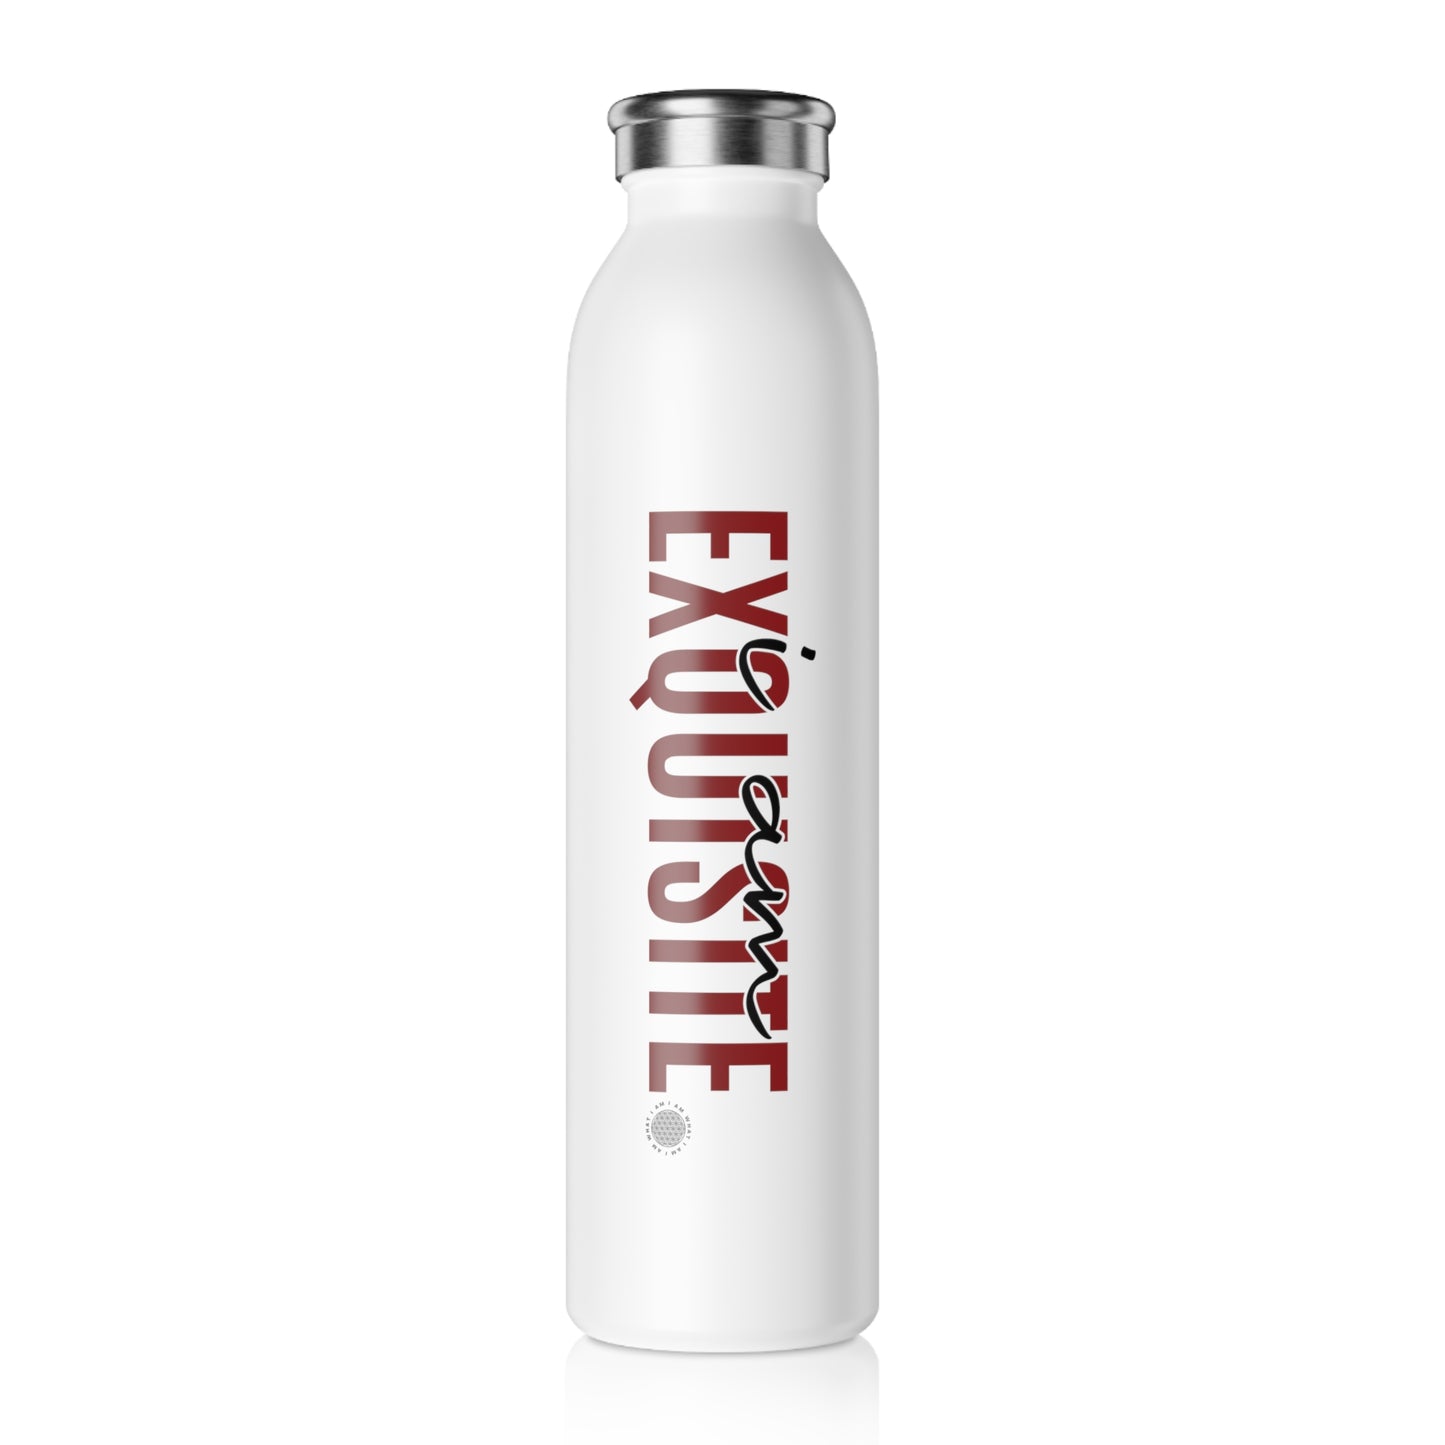 Our I Am Exquisite Slim Water Bottle is the perfect companion for your active lifestyle. This sleek and stylish bottle is designed to fit into any bag or pocket, making it easy to take with you wherever you go.